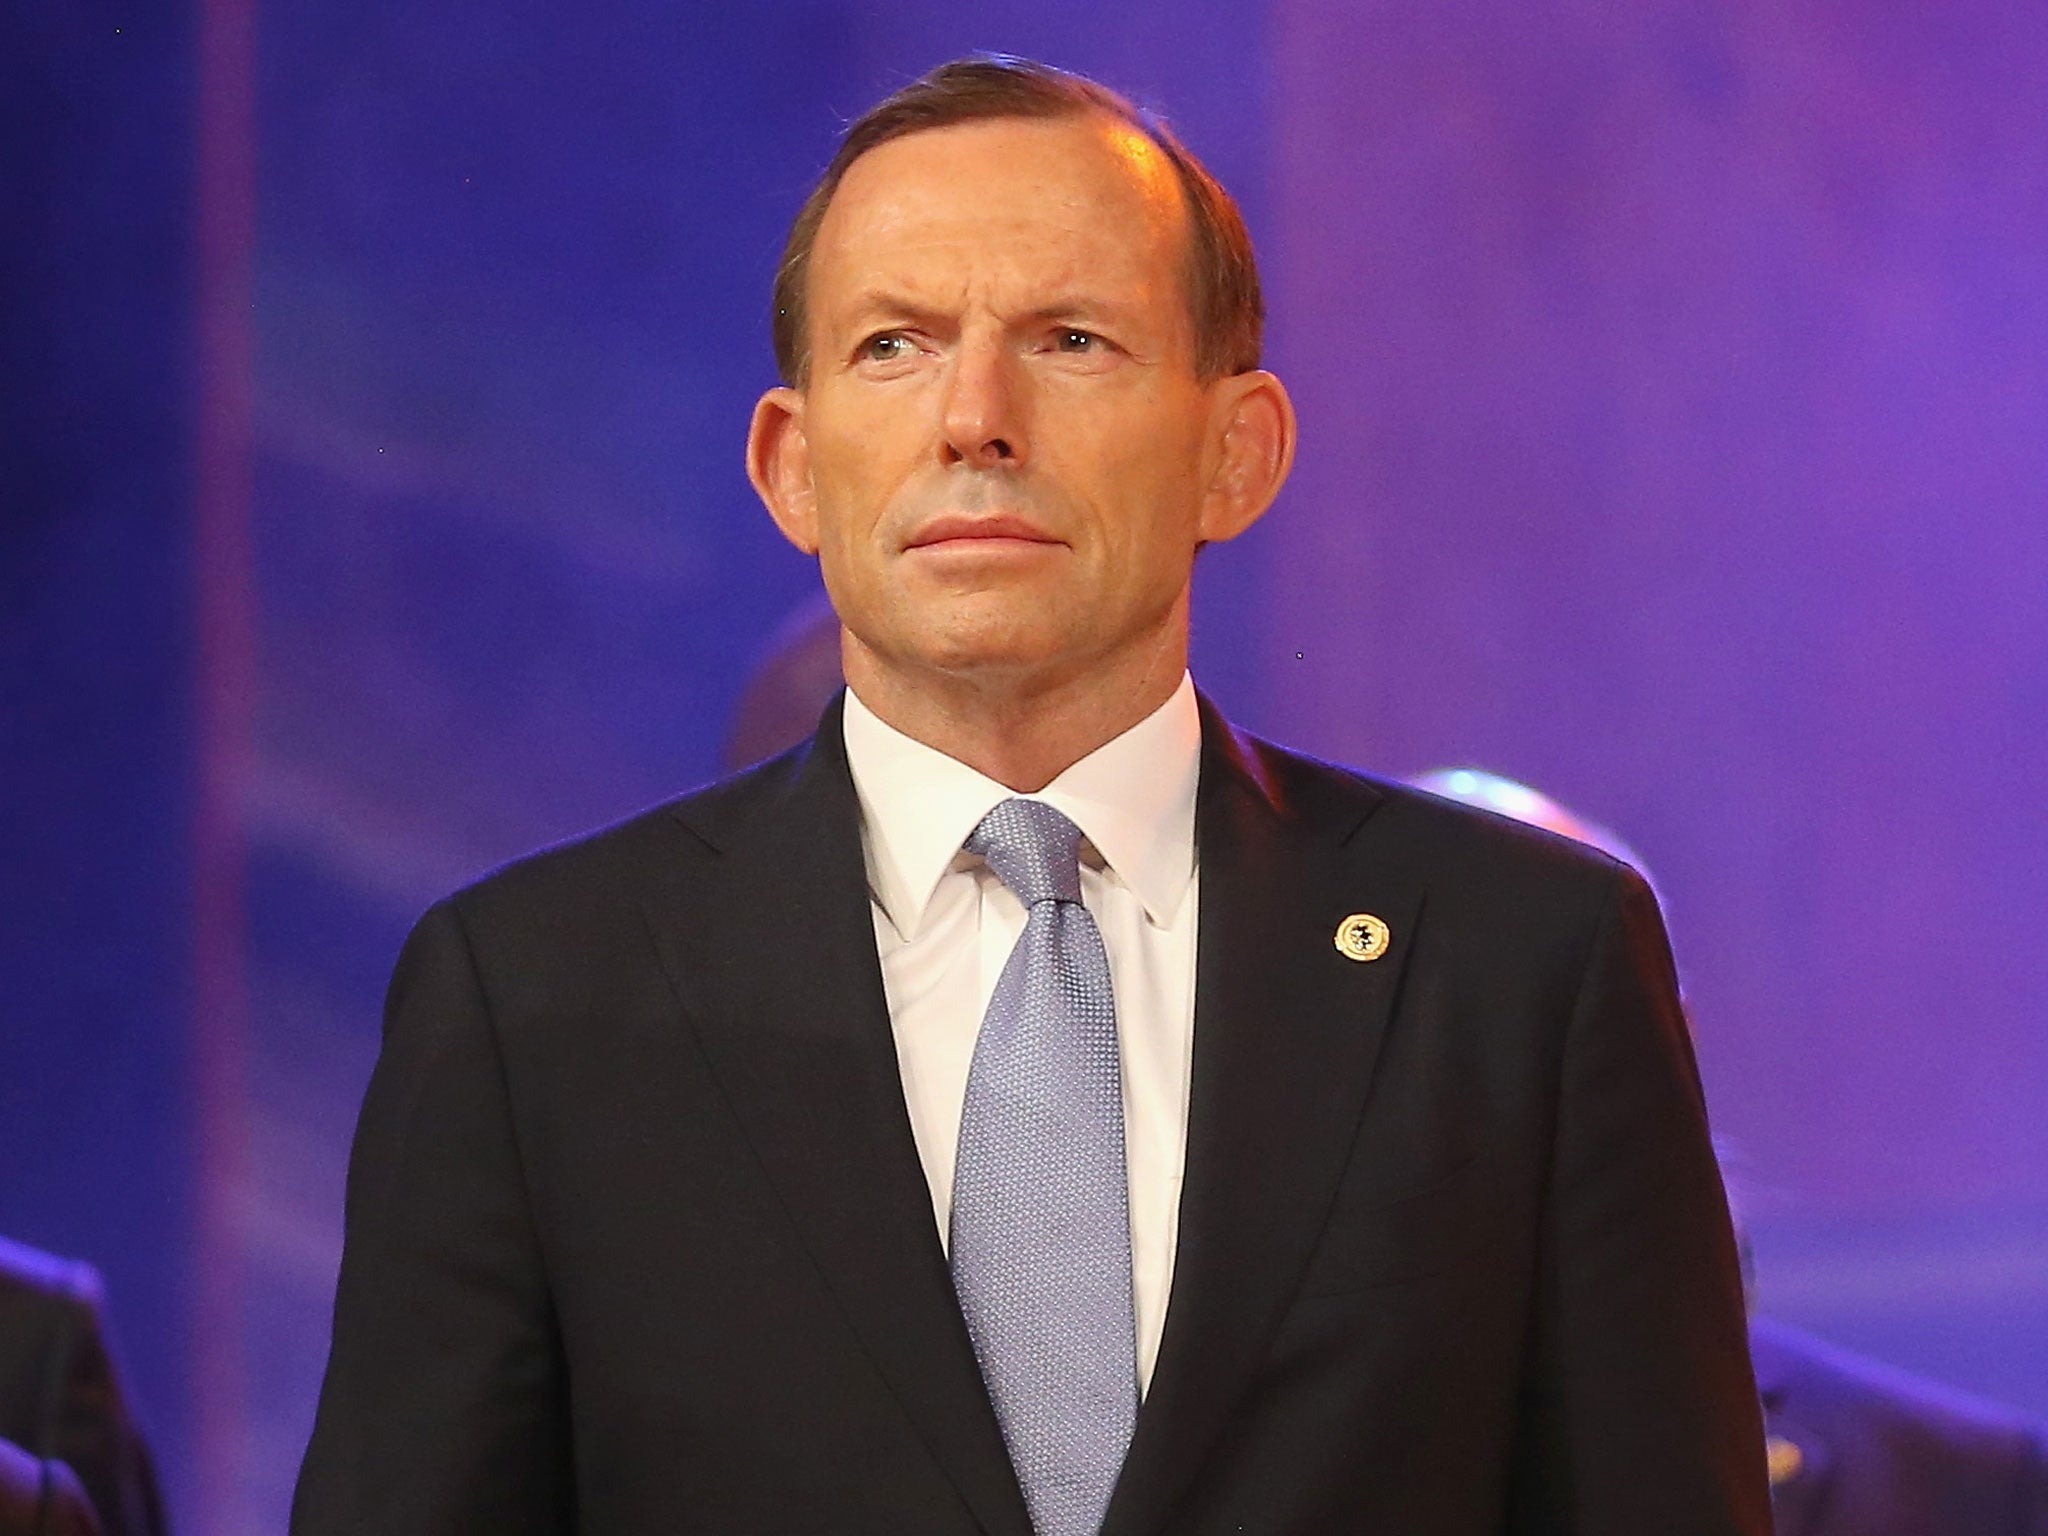 Australian Prime Minister Tony Abbott has accused the country's national broadcaster ABC of being unpatriotic